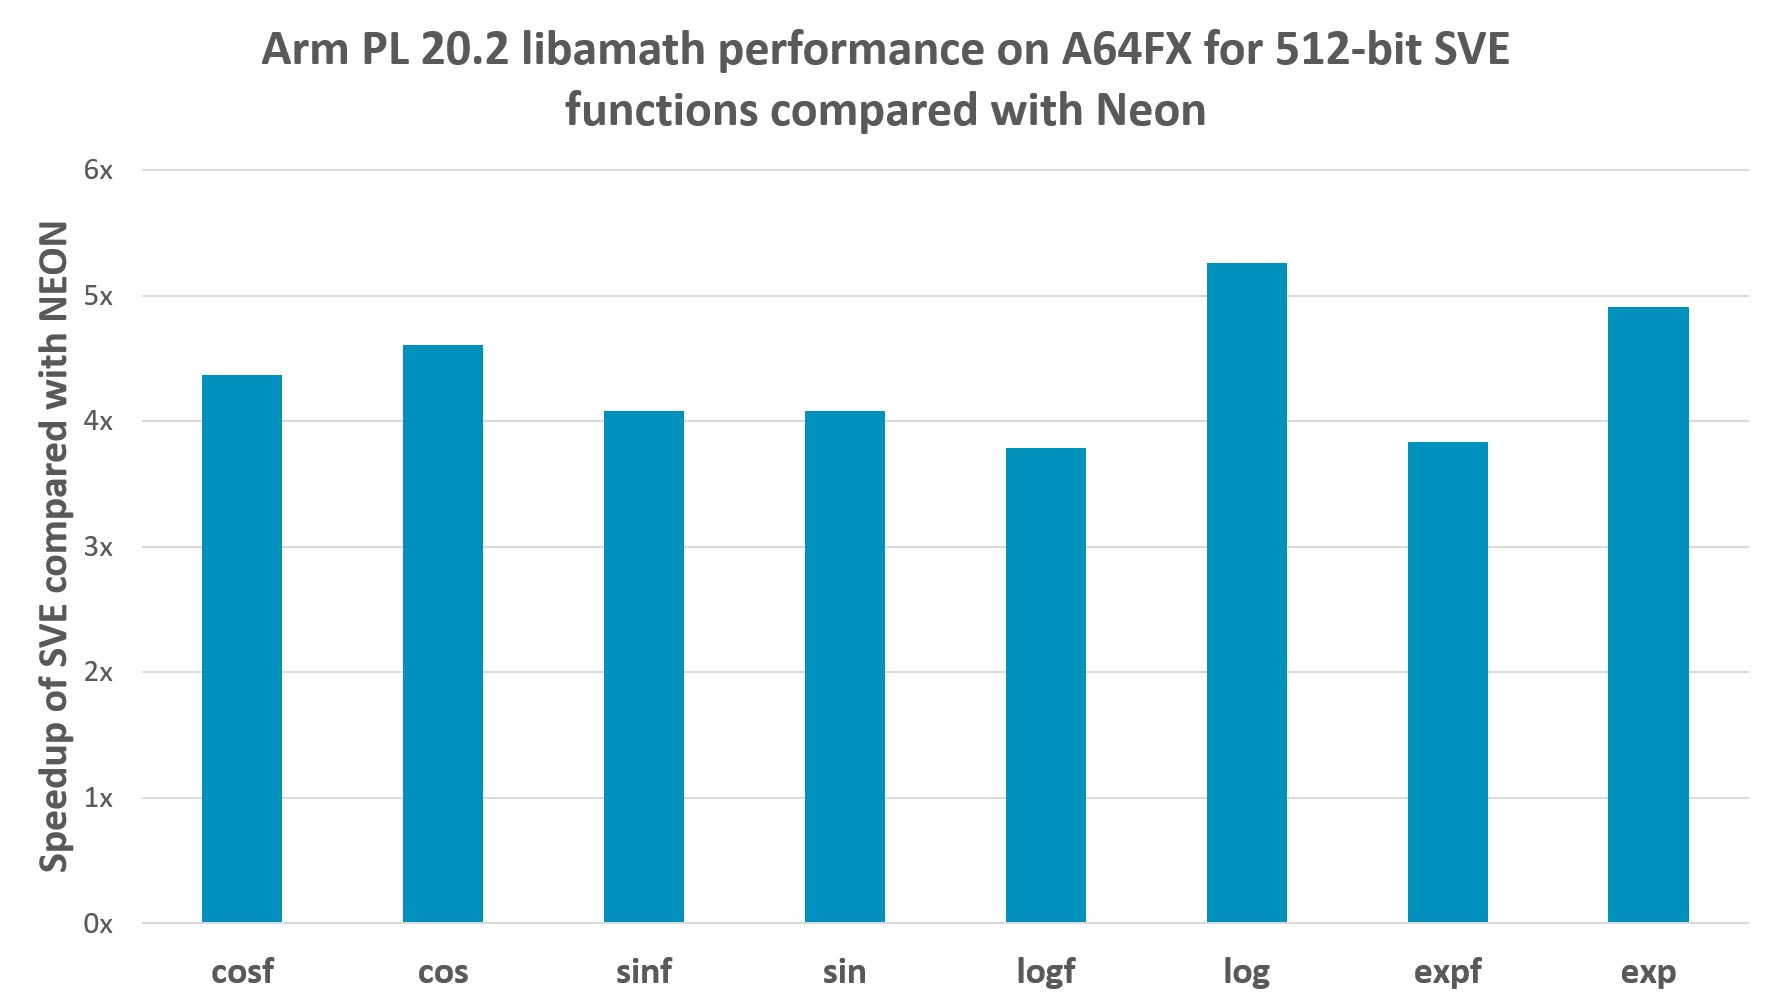 This is a graph showing the Arm PL 20.2 libamath performance